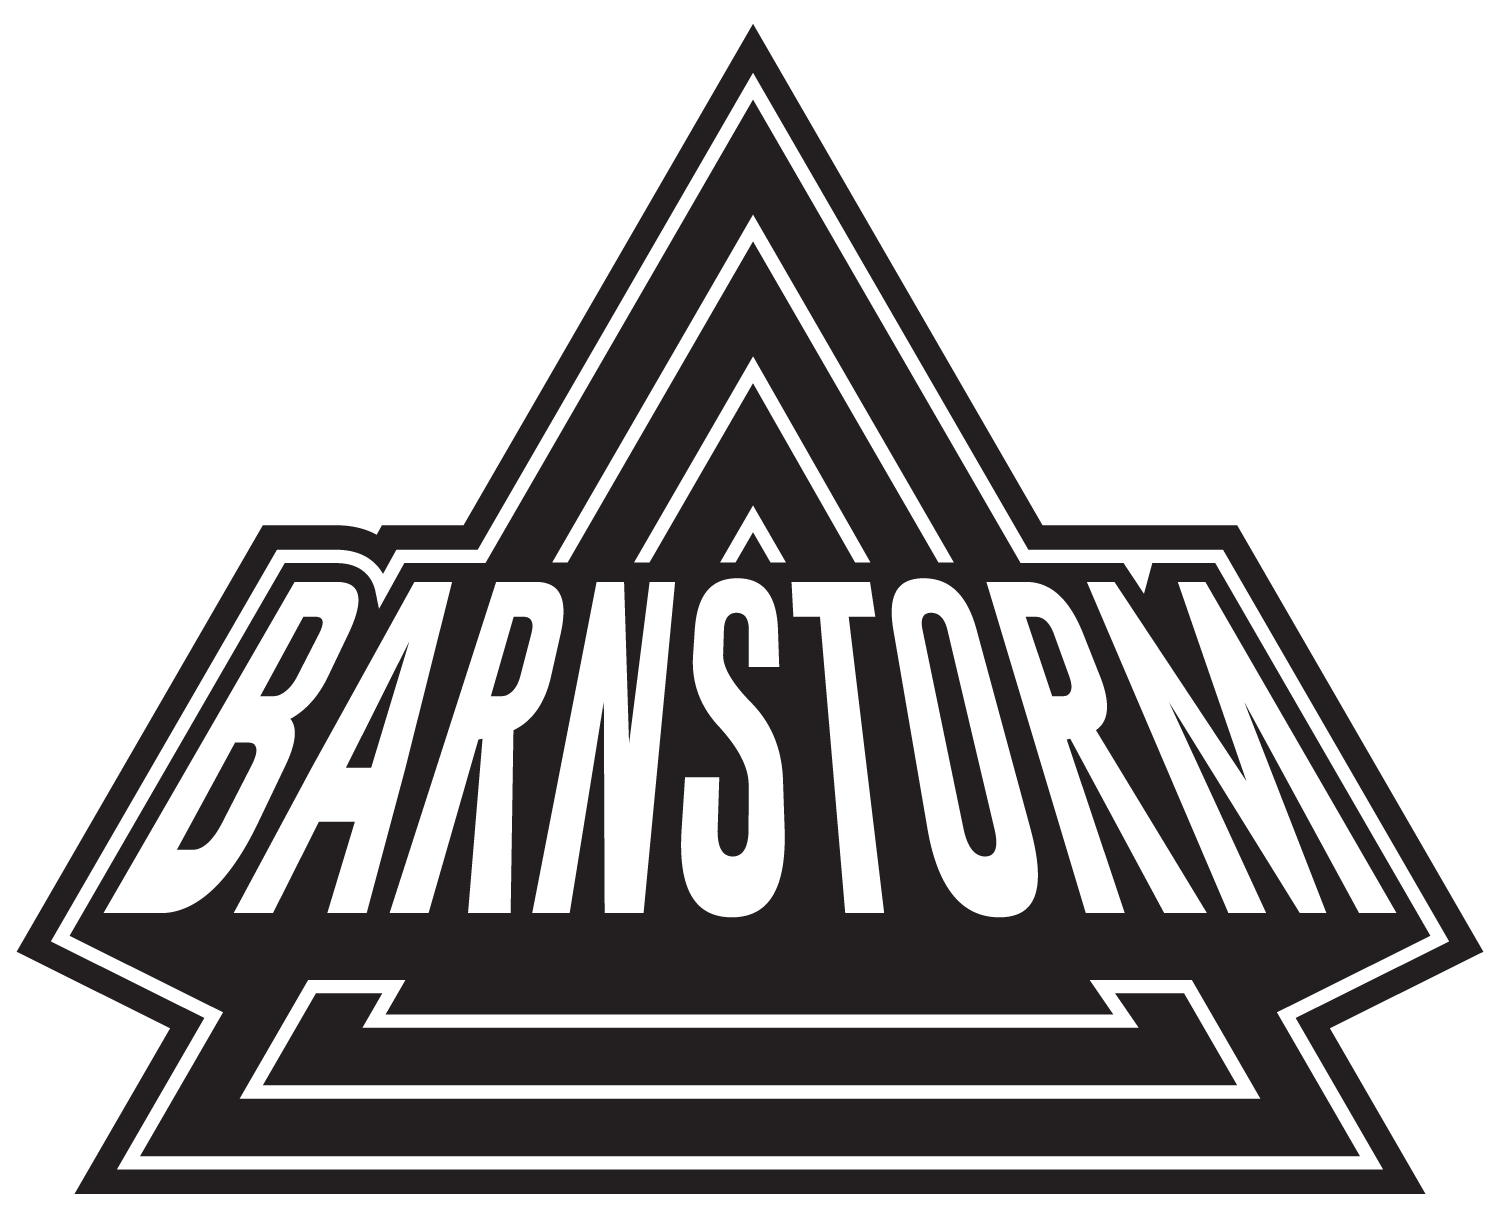 Barnstorm Event Production and Management